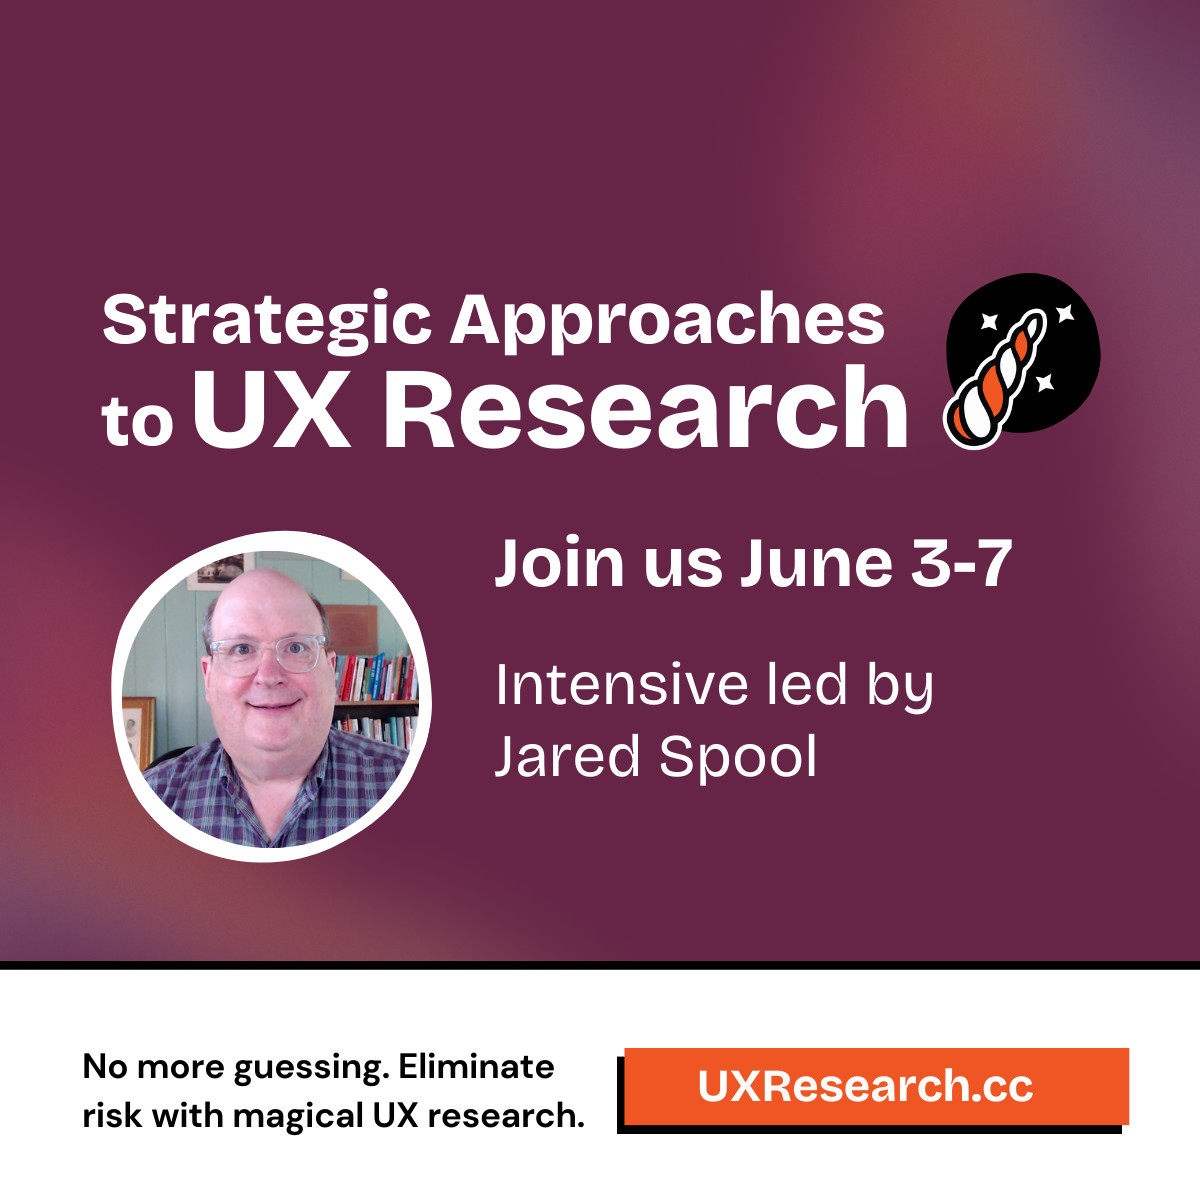 🗓️ Save the Date for our next Intensive: Strategic Approaches to UX Research Intensive led by Jared Spool June 3-7 research.centercentre.com